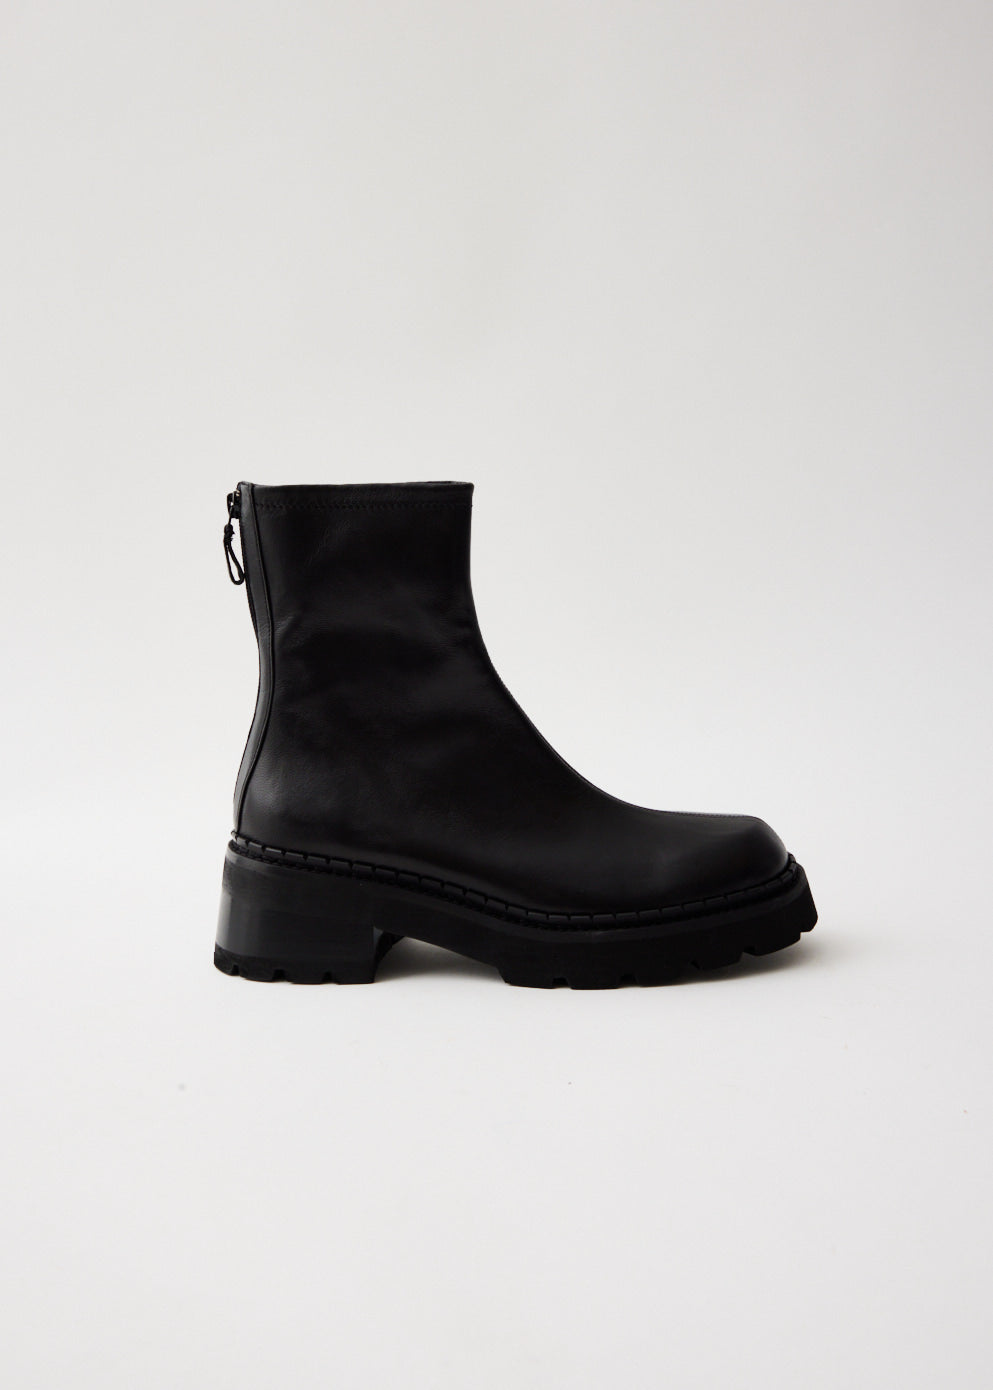 Alister Boots